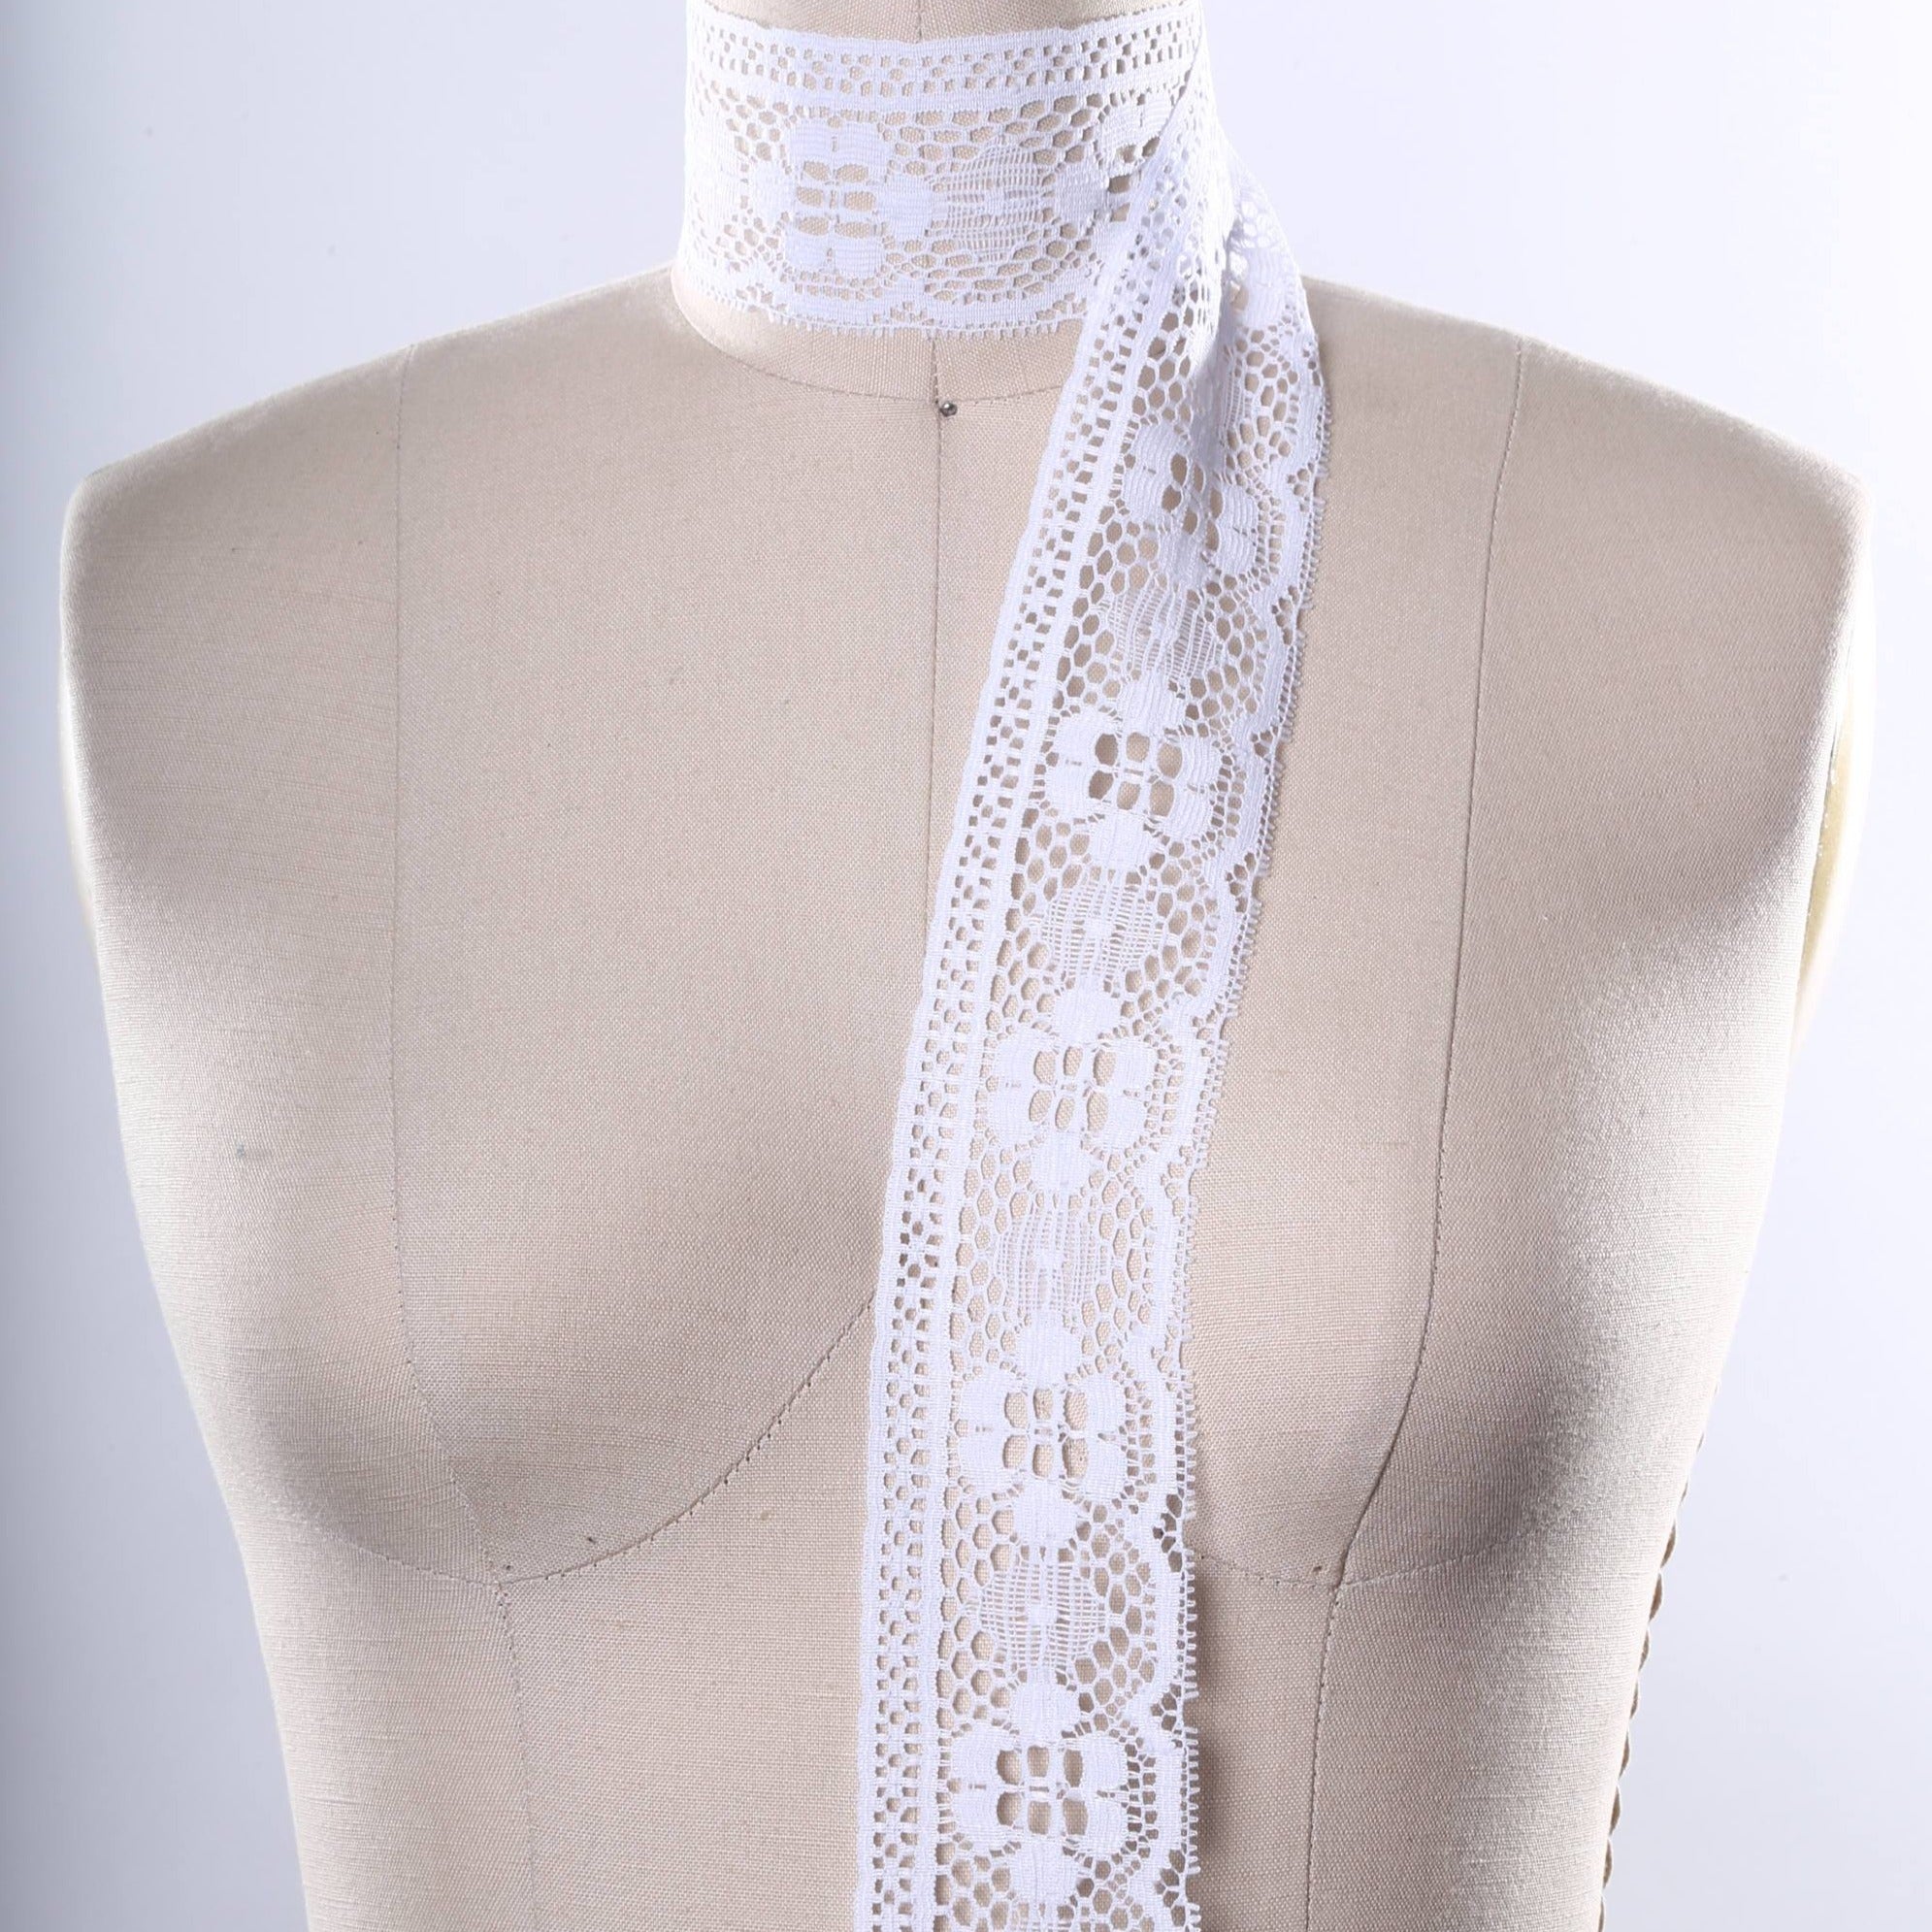 2 Yards Modern Print White or Ivory Polyester Lace Trim, Resembling Cluny Lace